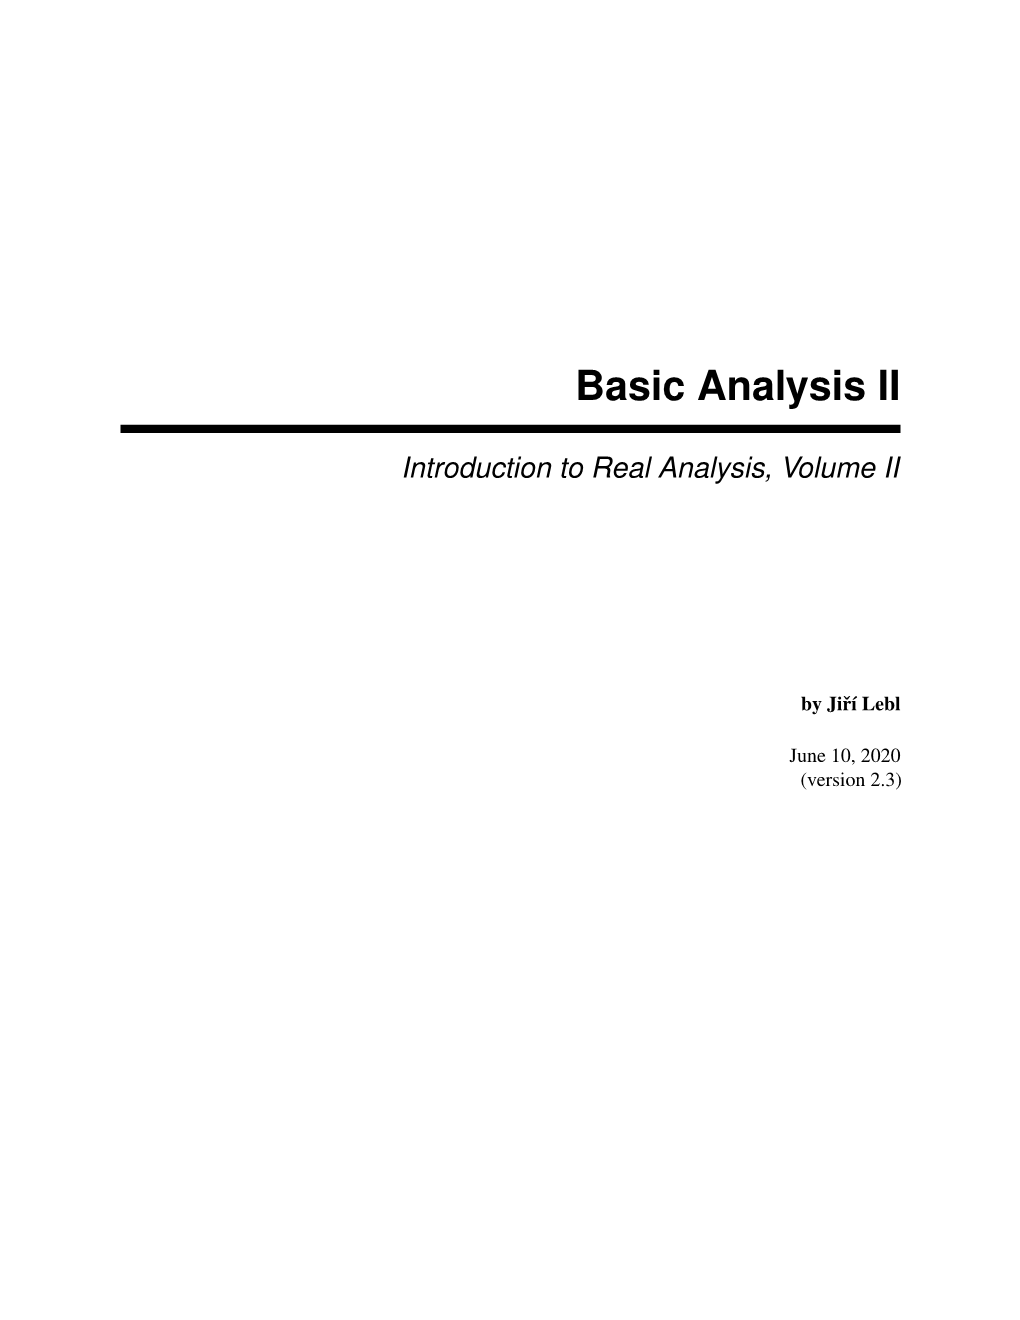 Introduction to Real Analysis, Volume II